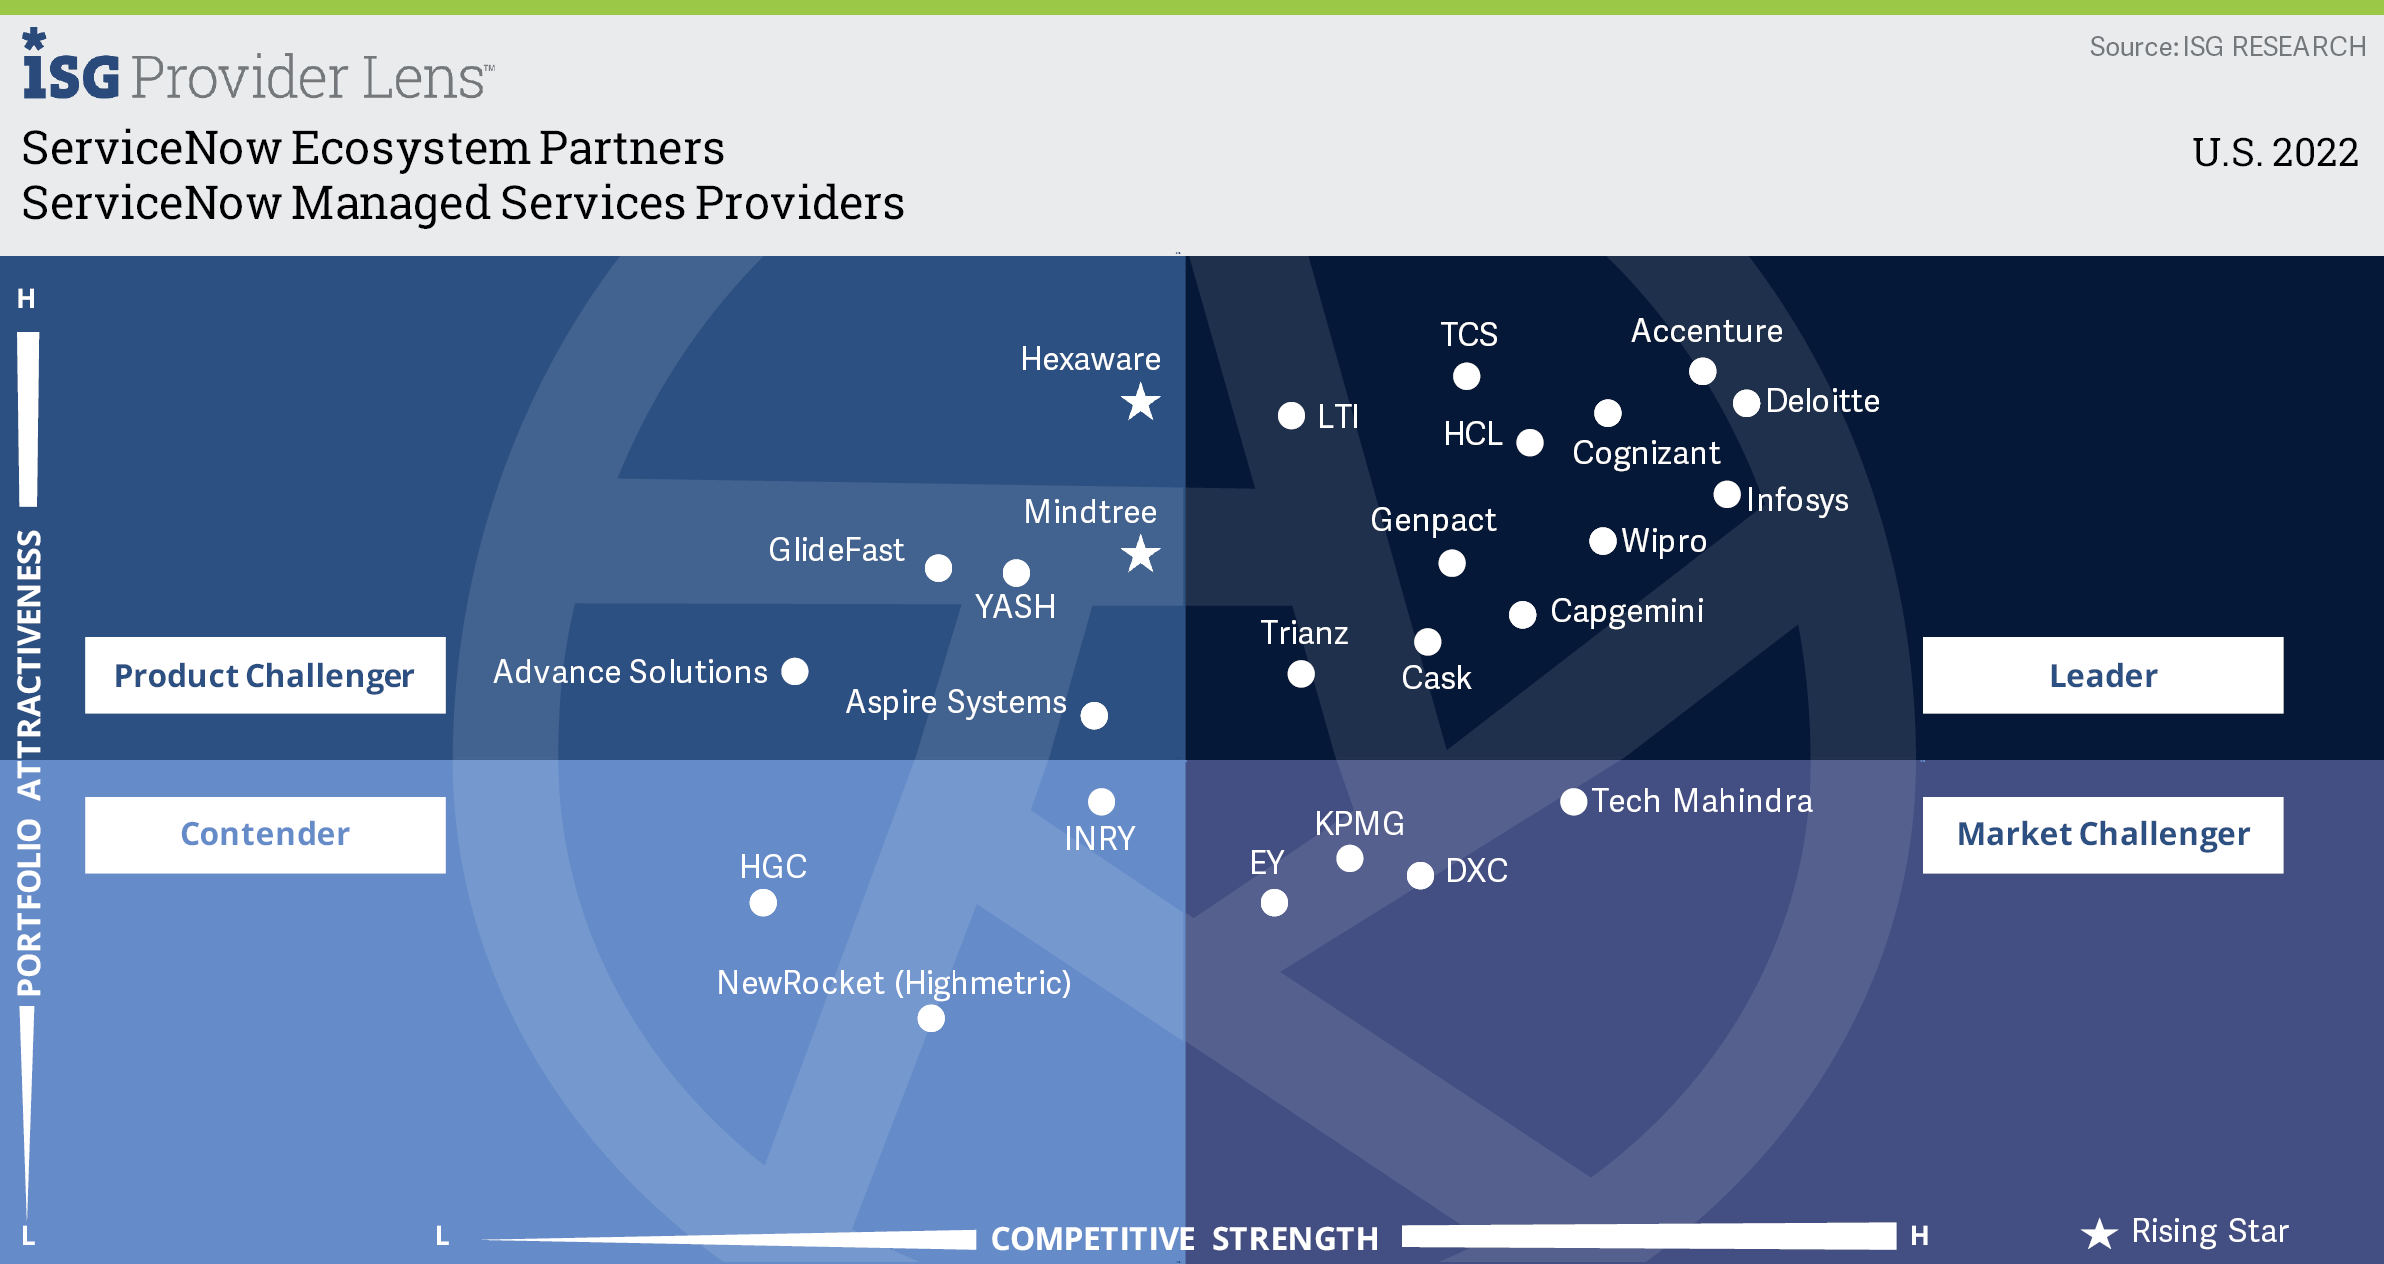 Leader - ServiceNow Managed Services